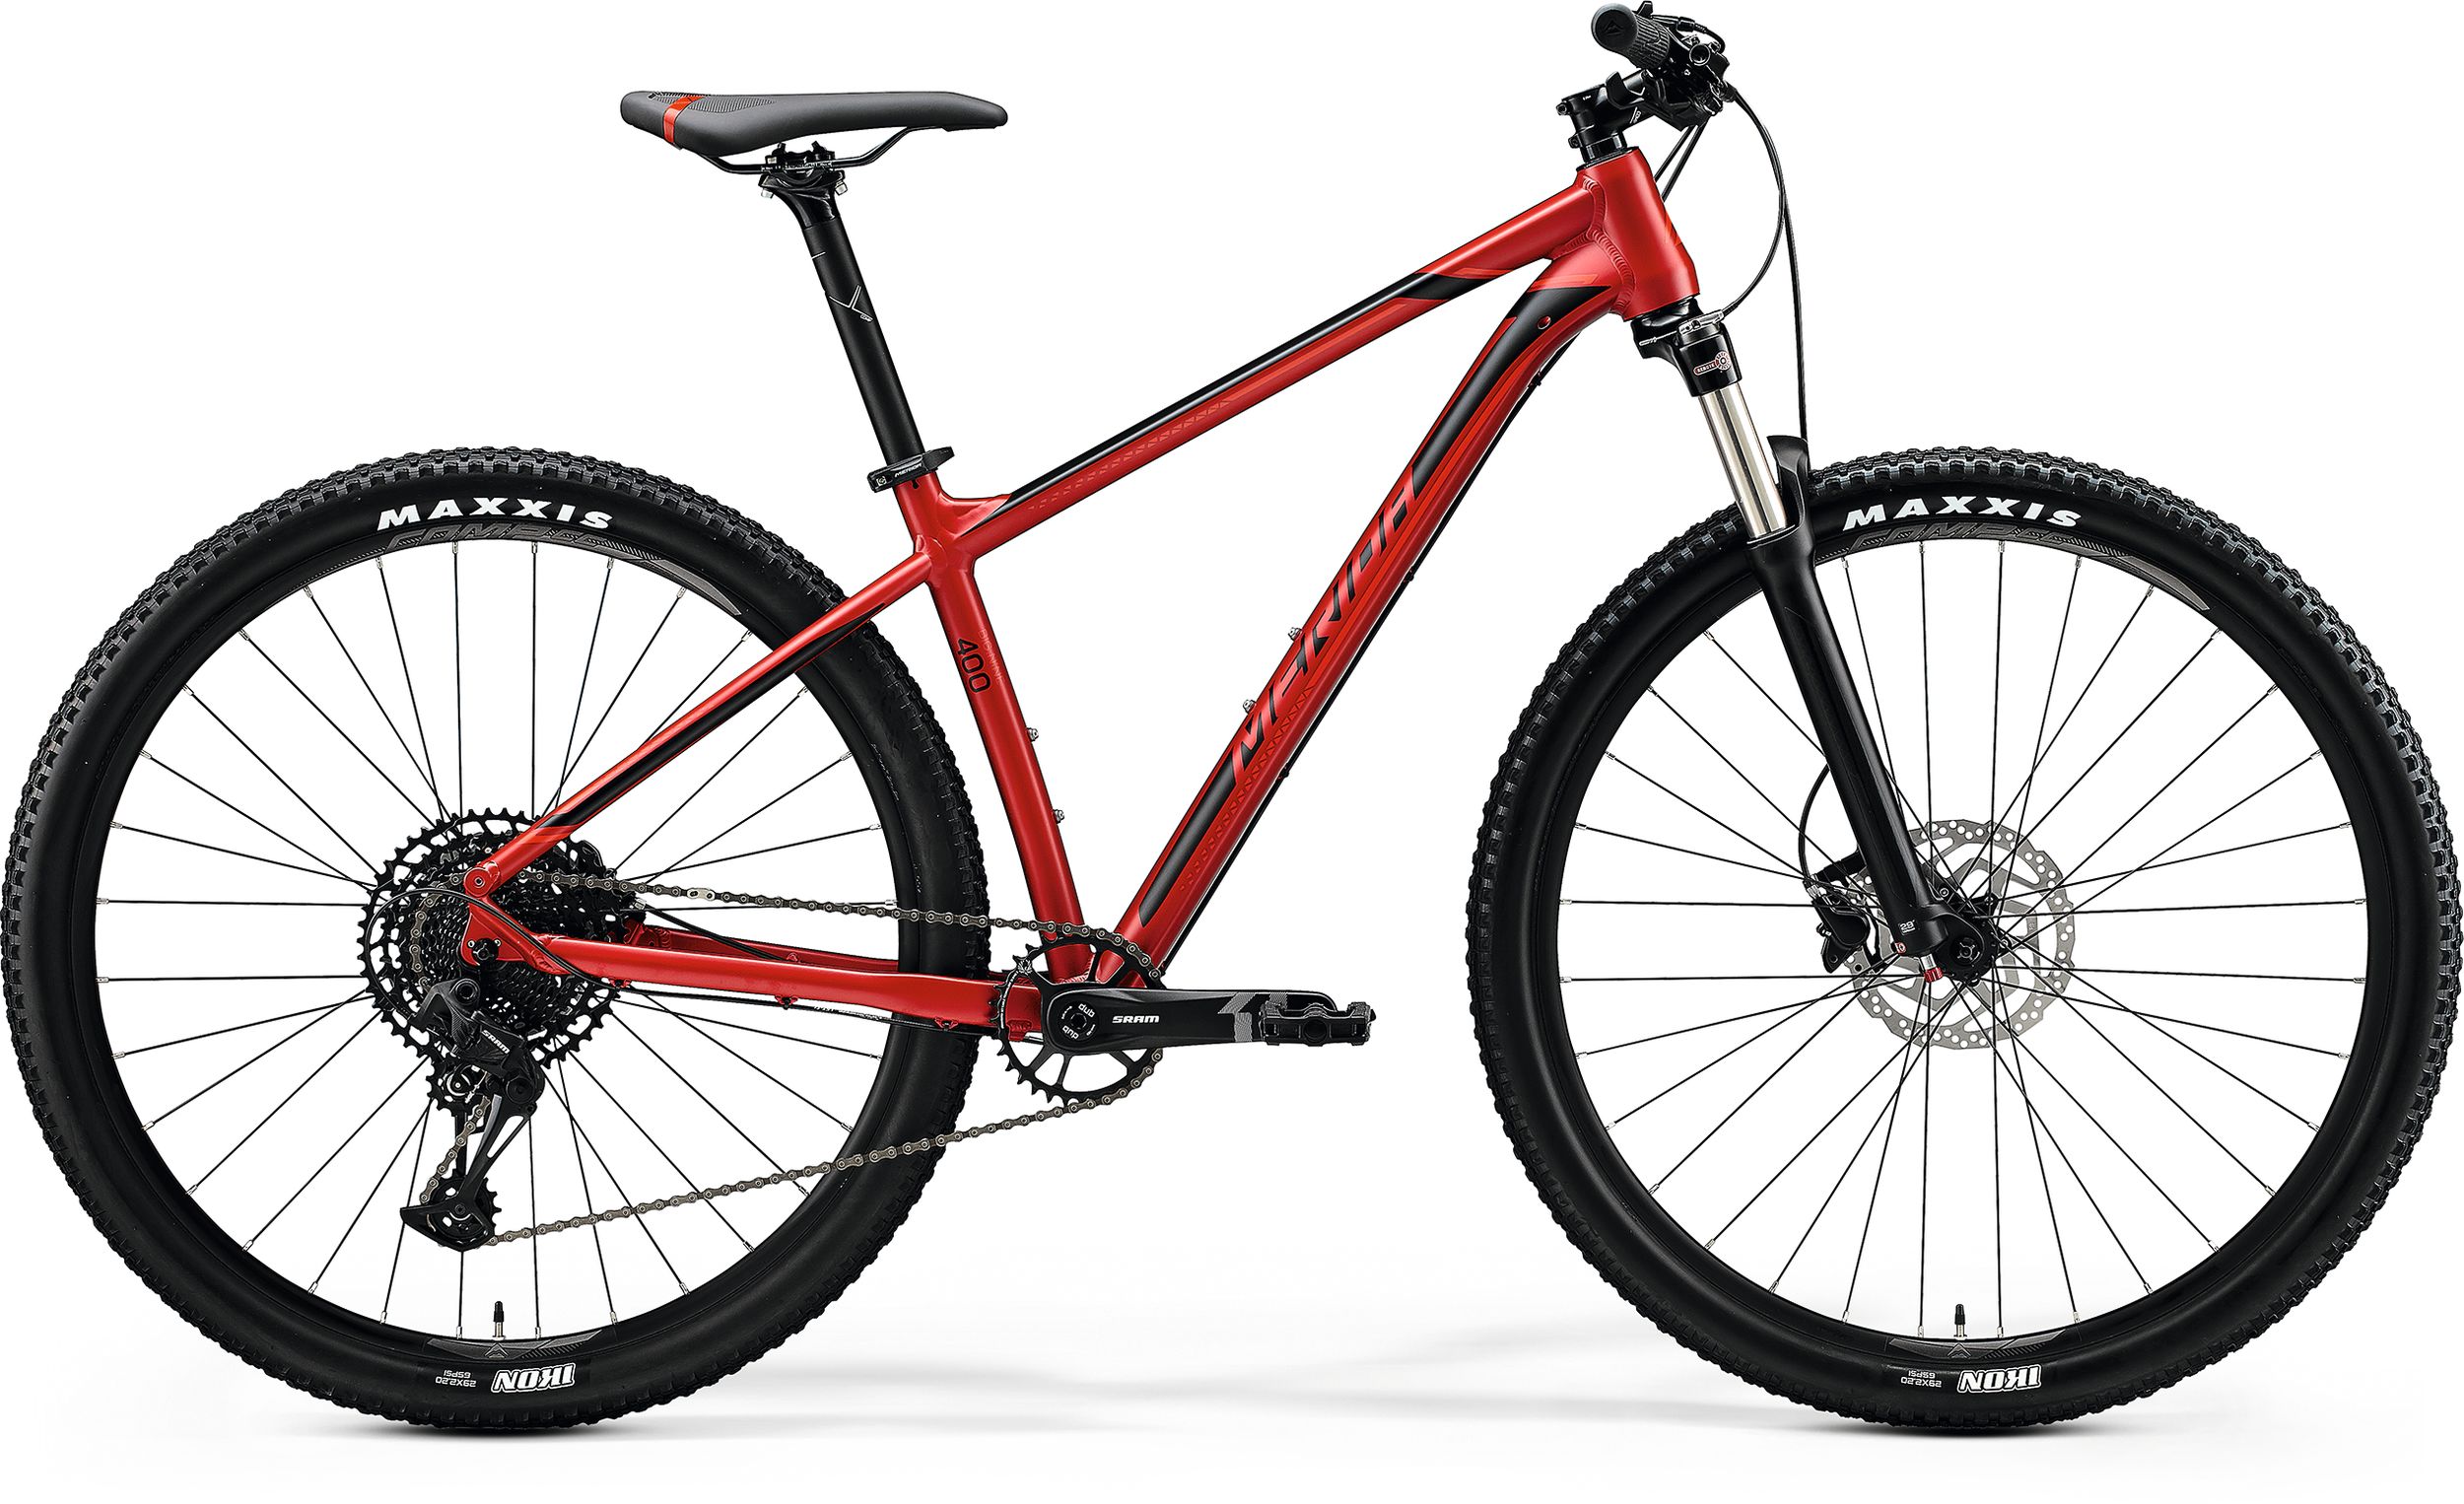 westhill electric bike review